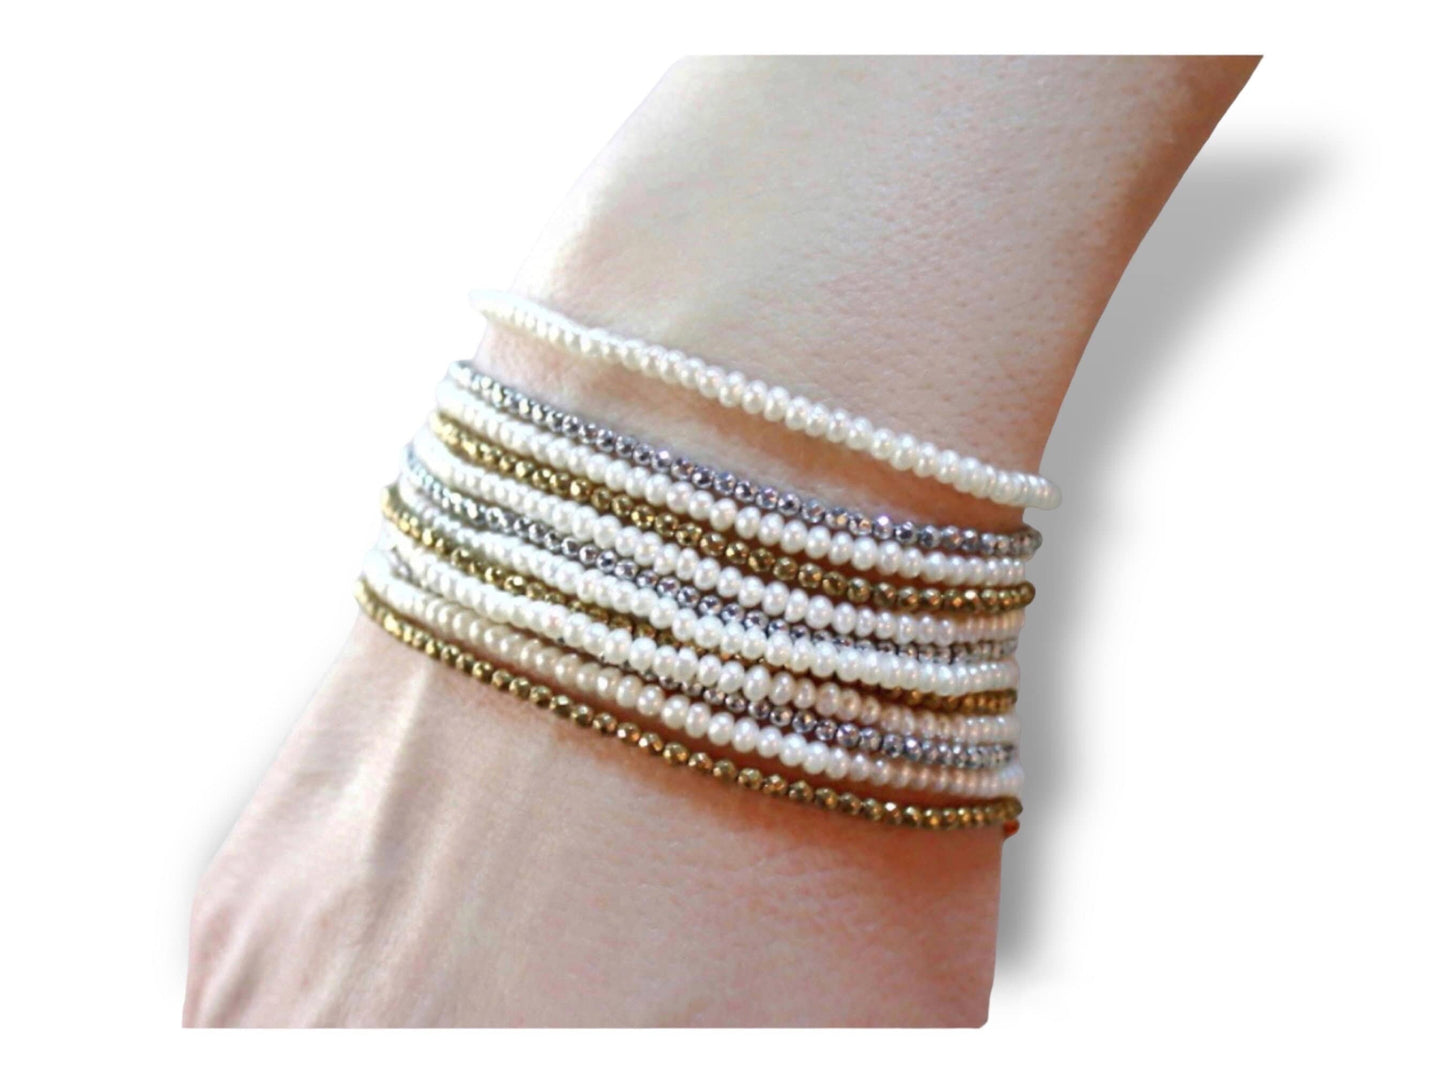 18k Gold Bracelet, interchanging rows of pearls and shimmering hematite, in yellow and silver tones.